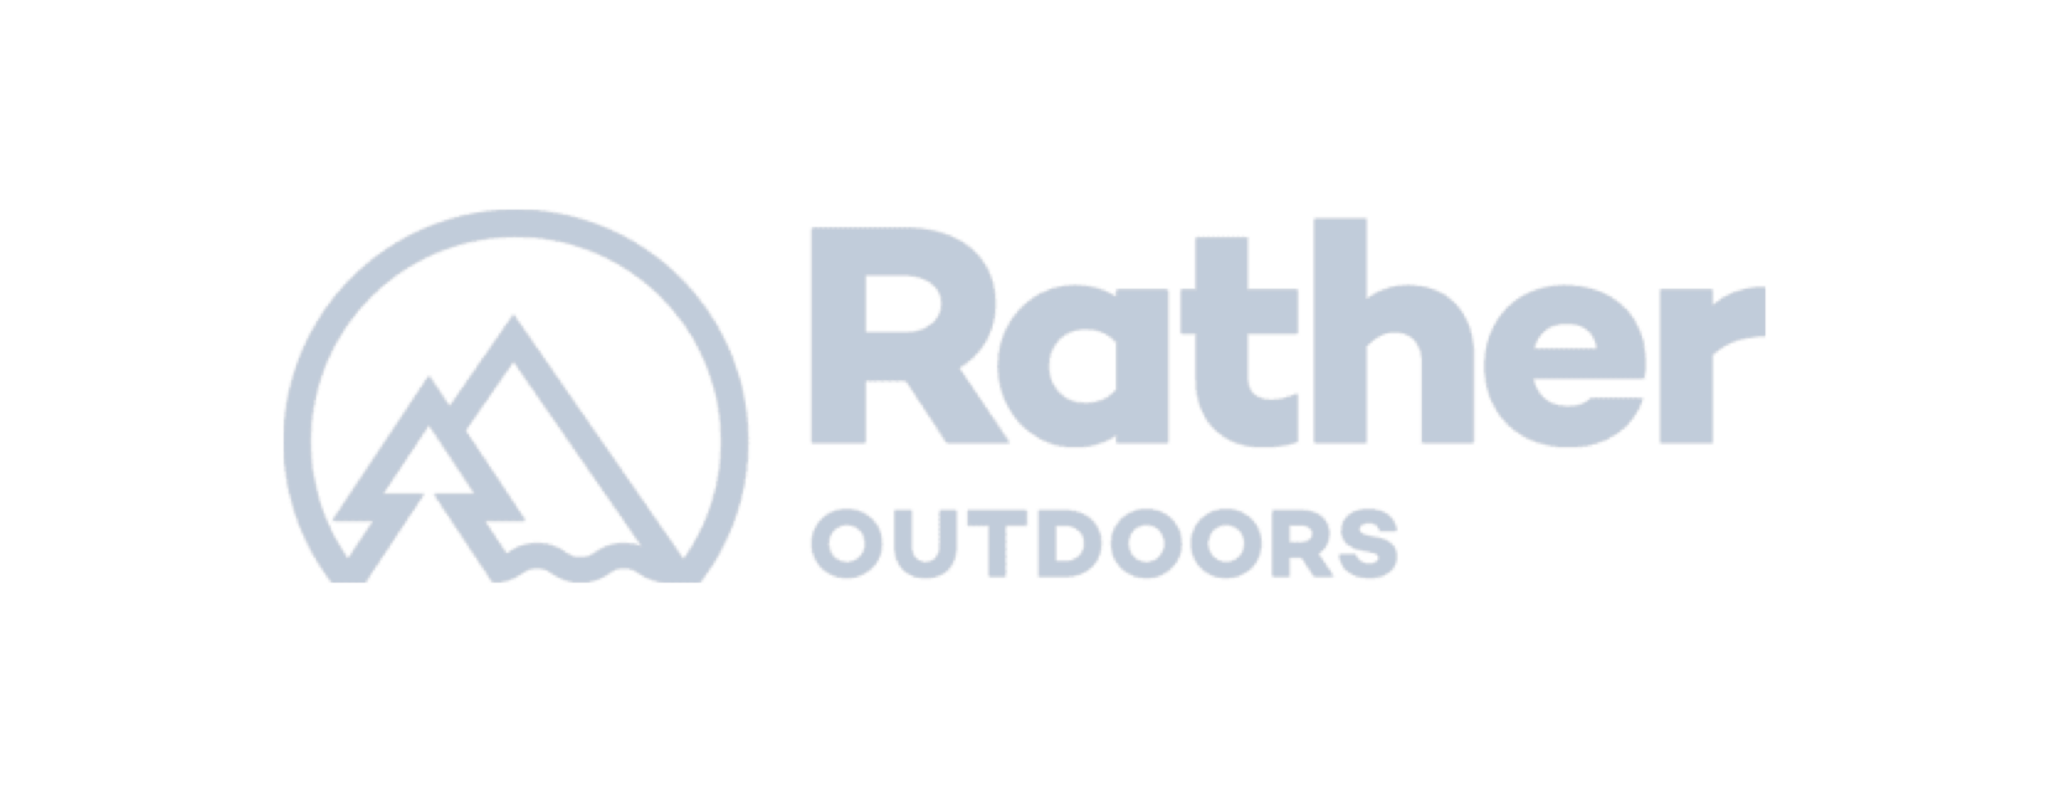 Rather Outdoors logo